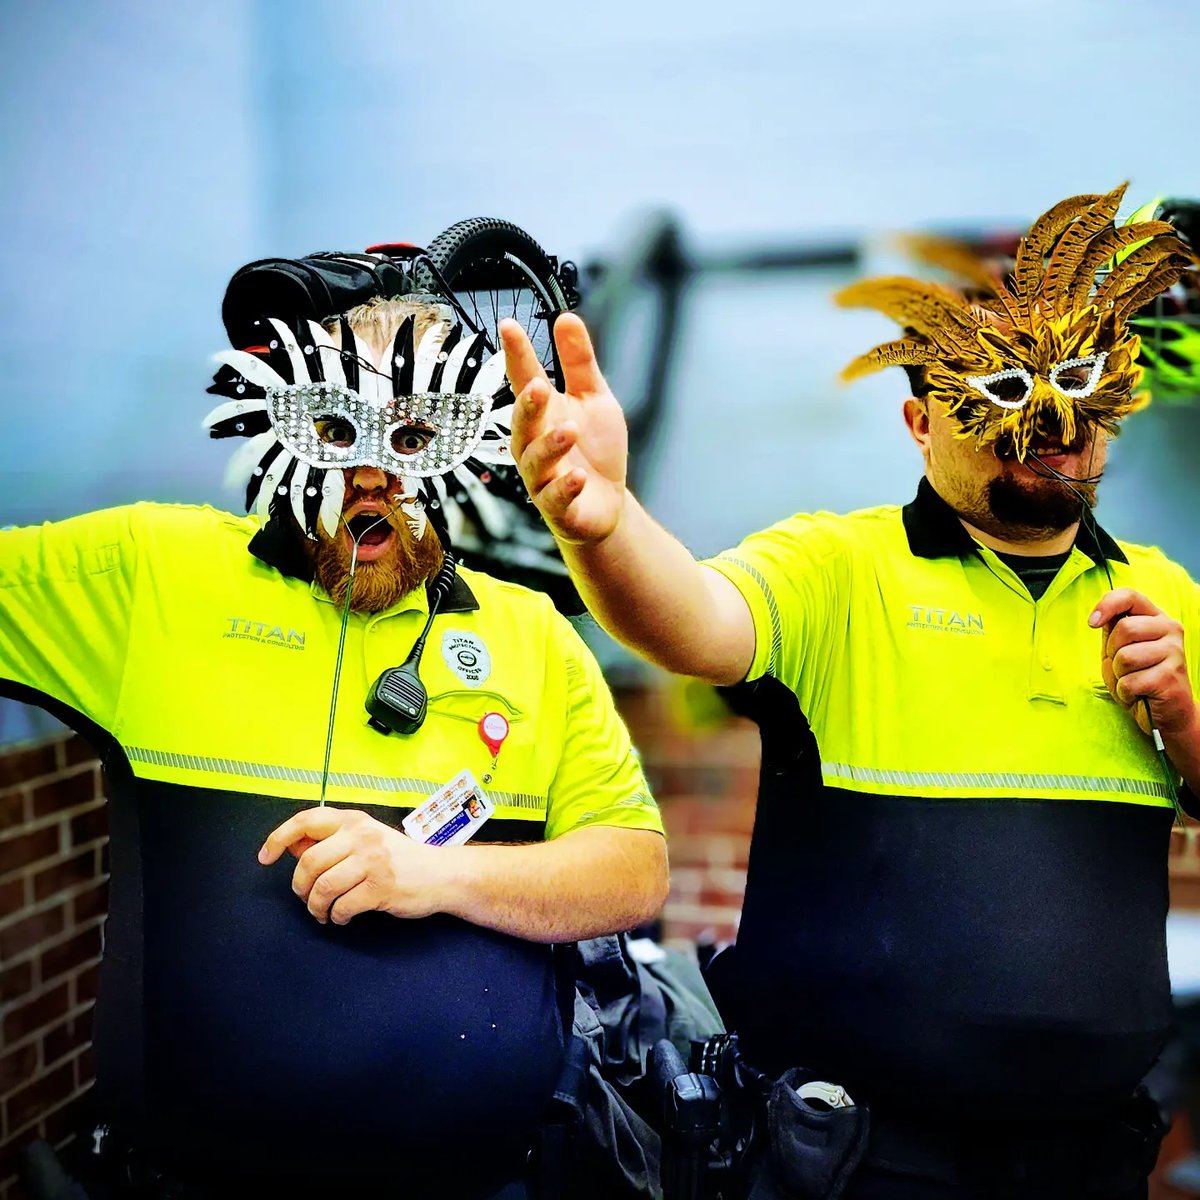 Titan's ready for Mardi Gras.. are you? Join us on Fat Tuesday for food, music, and more!
 eventbrite.com/.../2023-mardi…...
#nekcchamber #kcmo #nekc #culture #events #fun #mardigras2023